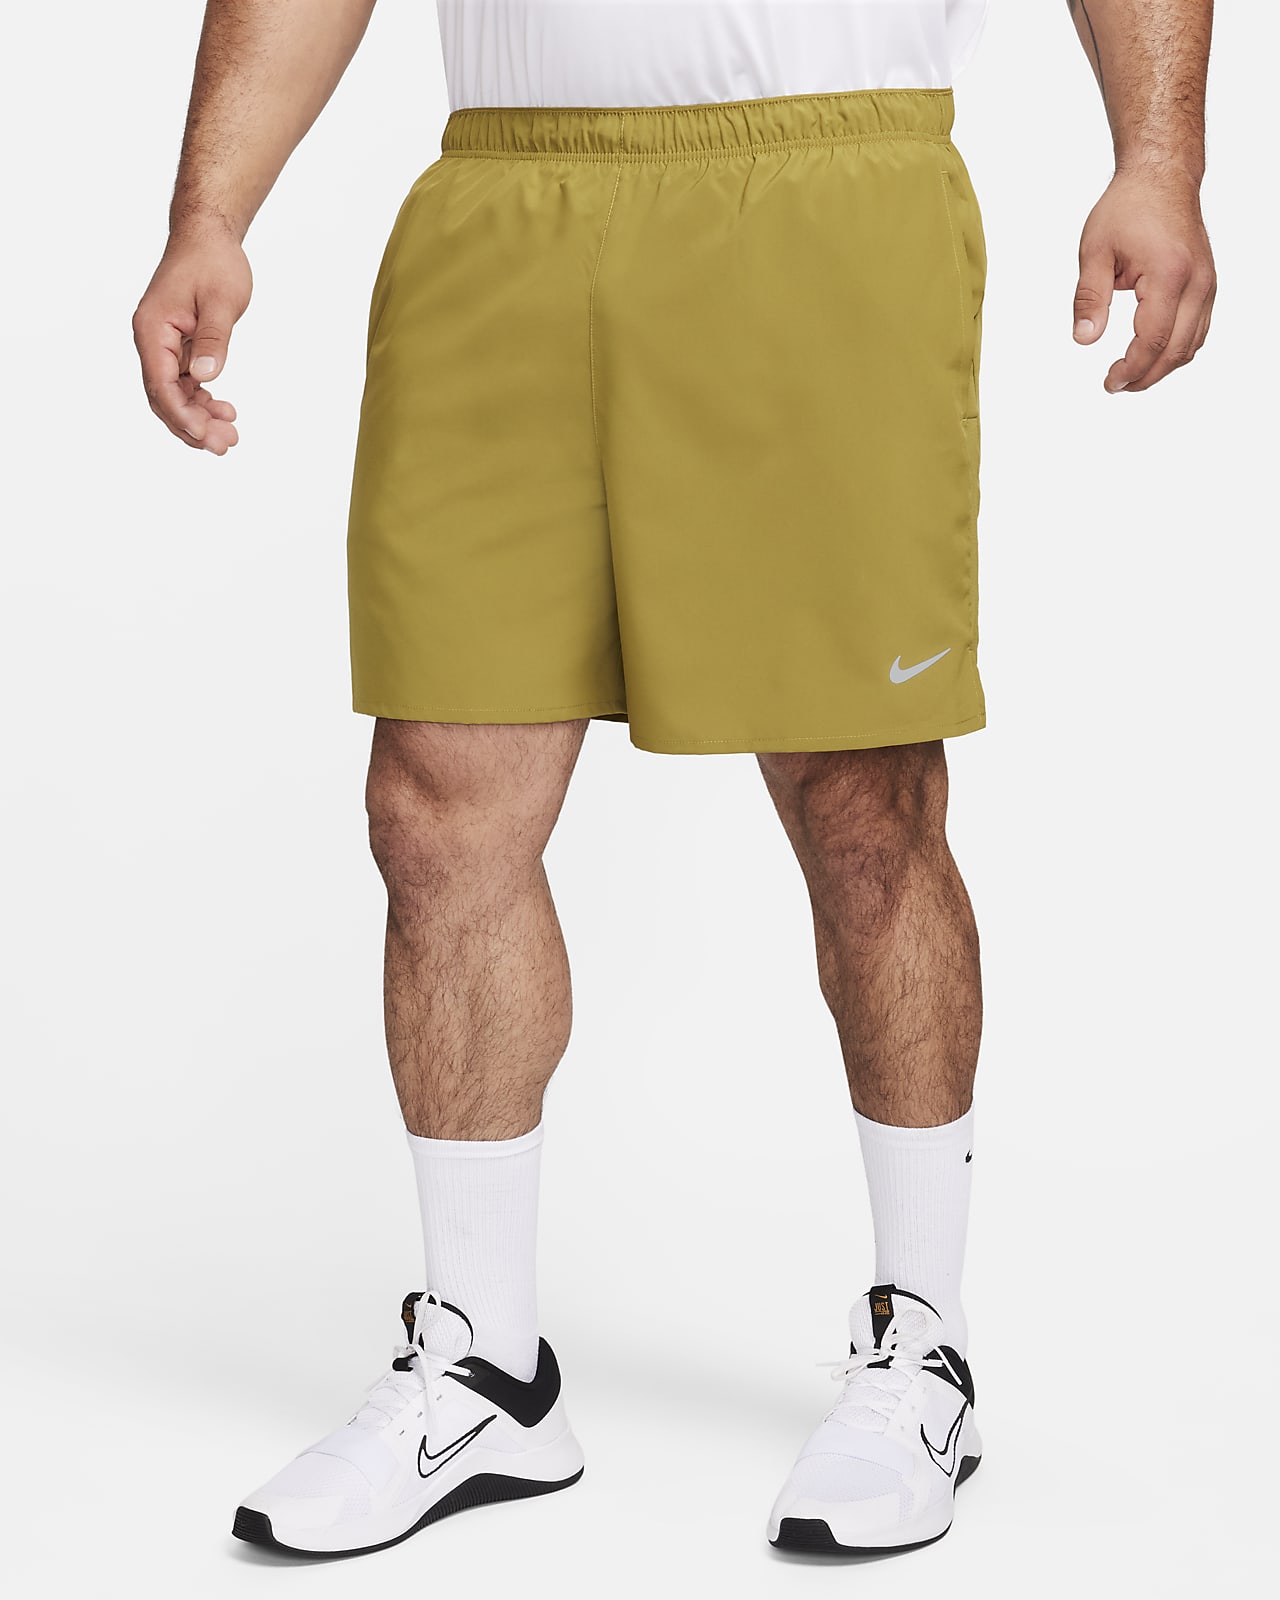 Nike, Dri-FIT Stride Men's 7 Brief-Lined Running Shorts